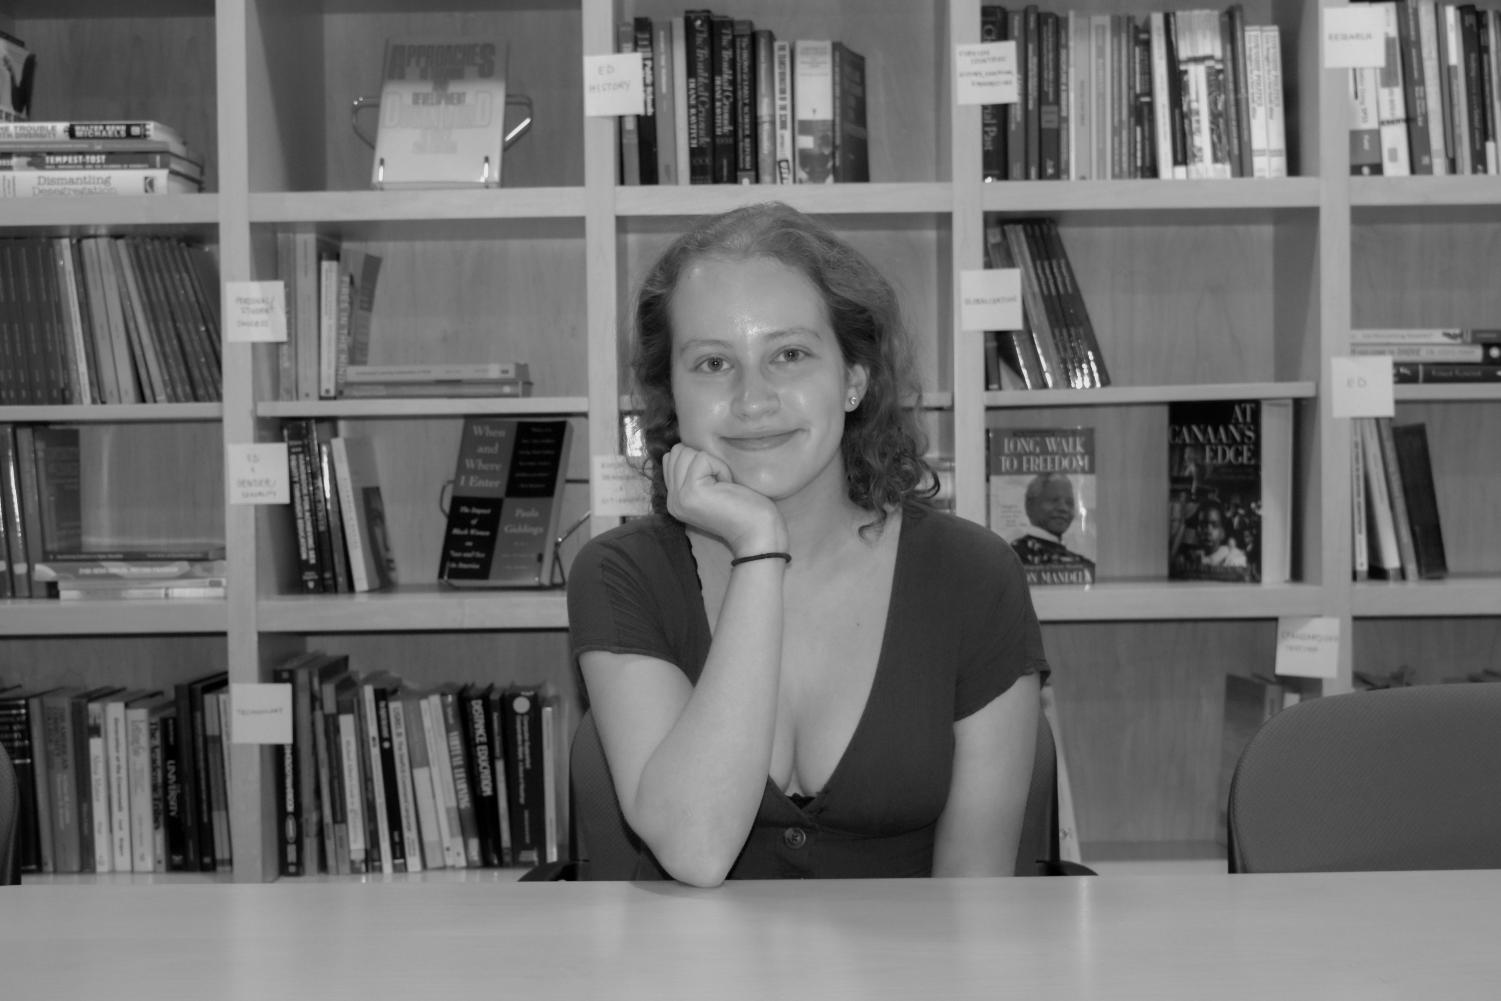 A black-and-white image of a female college student with light curly hair, a dark top, and a hair tie on her wrist sitting in a chair. She smiles at the camera with her chin resting in her hand in front of a bookshelf with four rows and five columns.